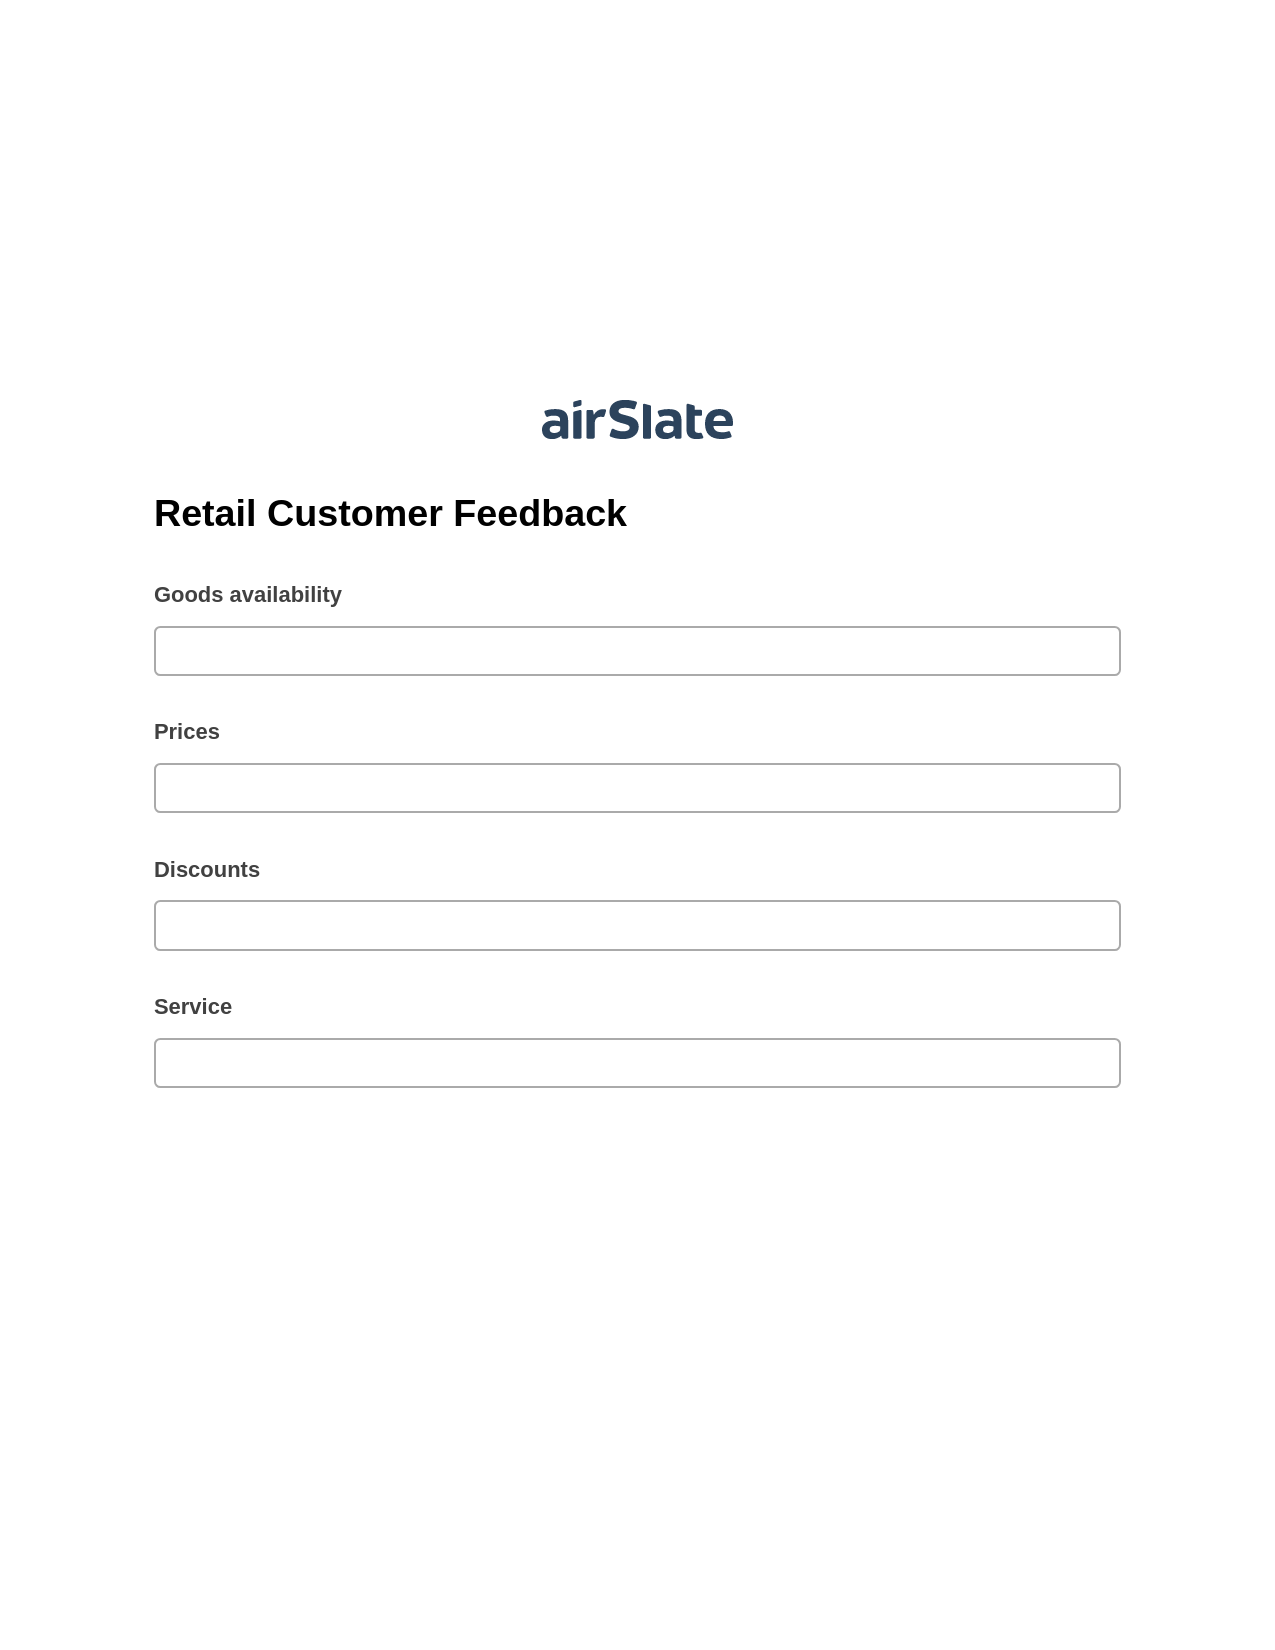 Retail Customer Feedback Pre-fill Slate from MS Dynamics 365 Records Bot, Reminder Bot, Export to Smartsheet